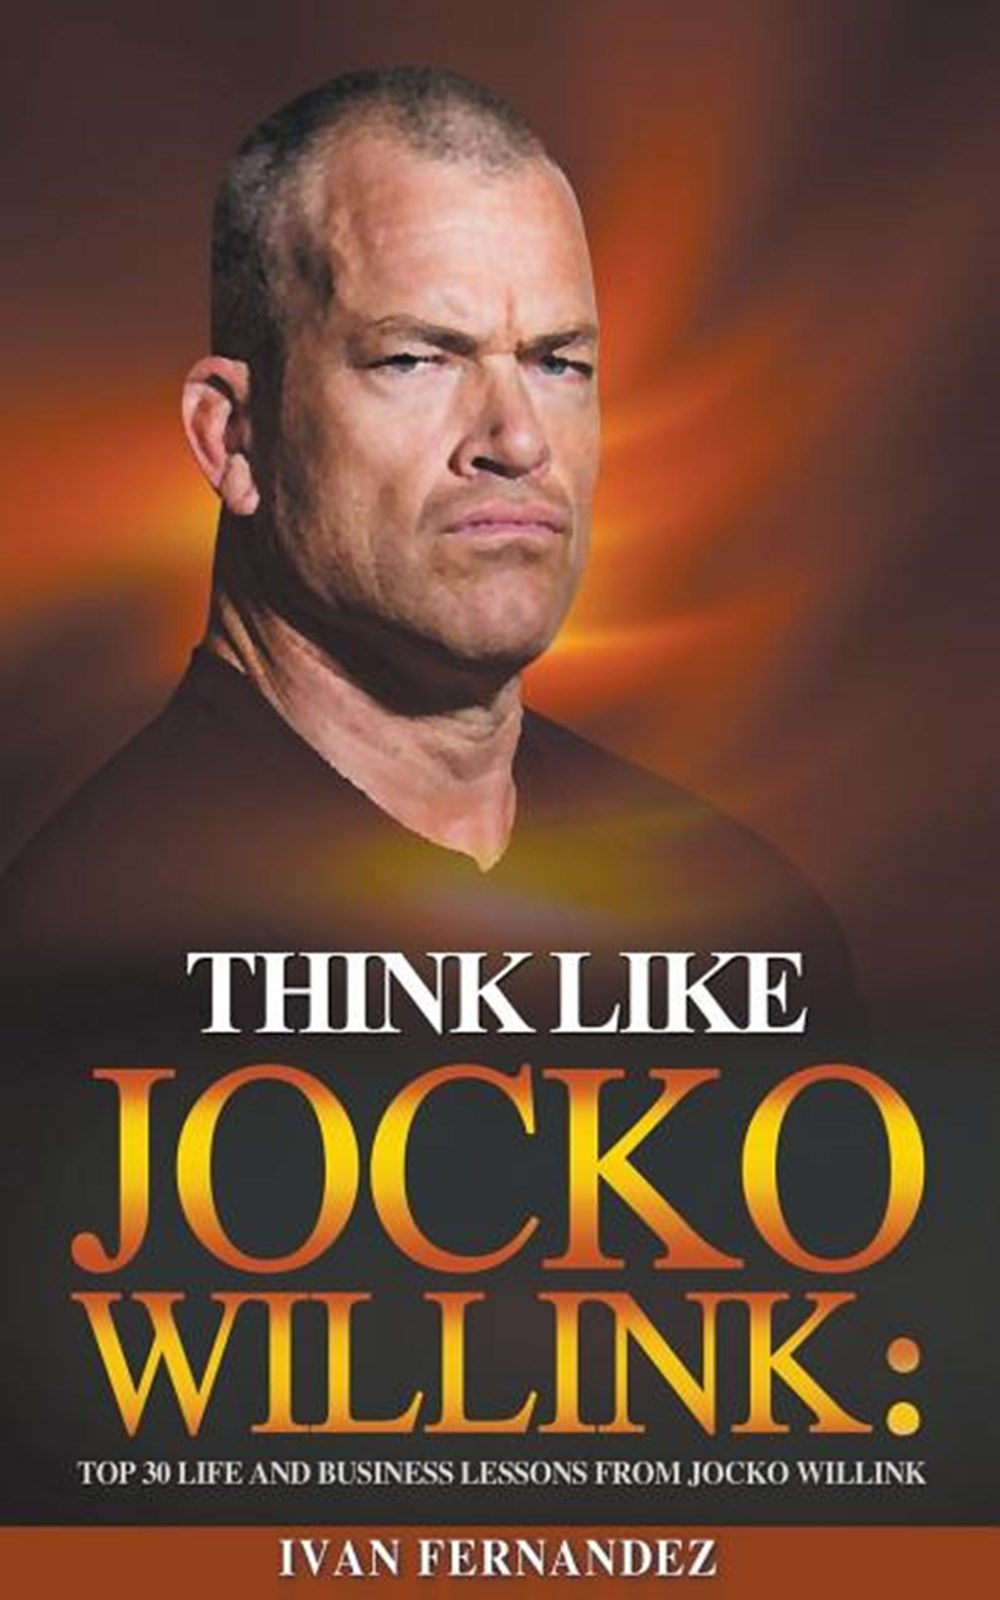 Think Like Jocko Willink: Top 30 Life and Business Lessons from Jocko Willink